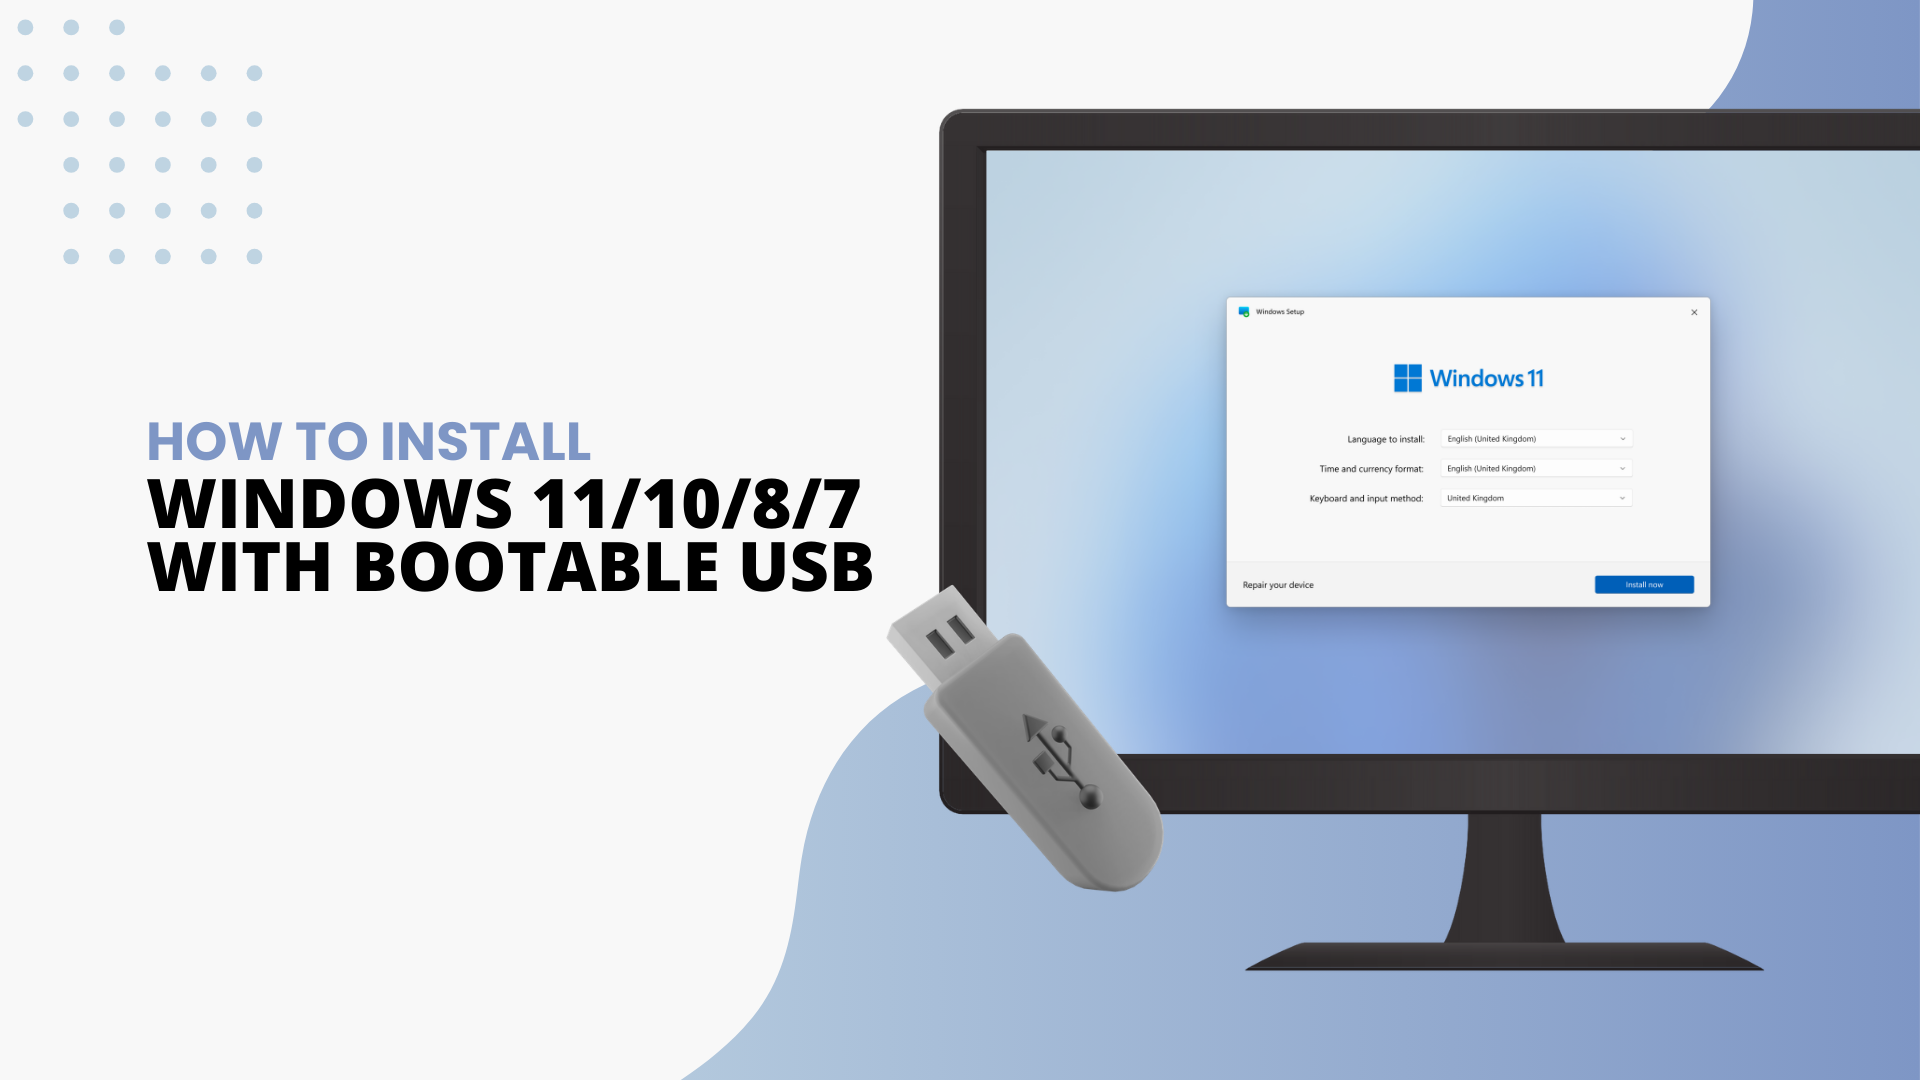 How to Install Windows 11, 10, 8.1 or 7 Using a Bootable USB